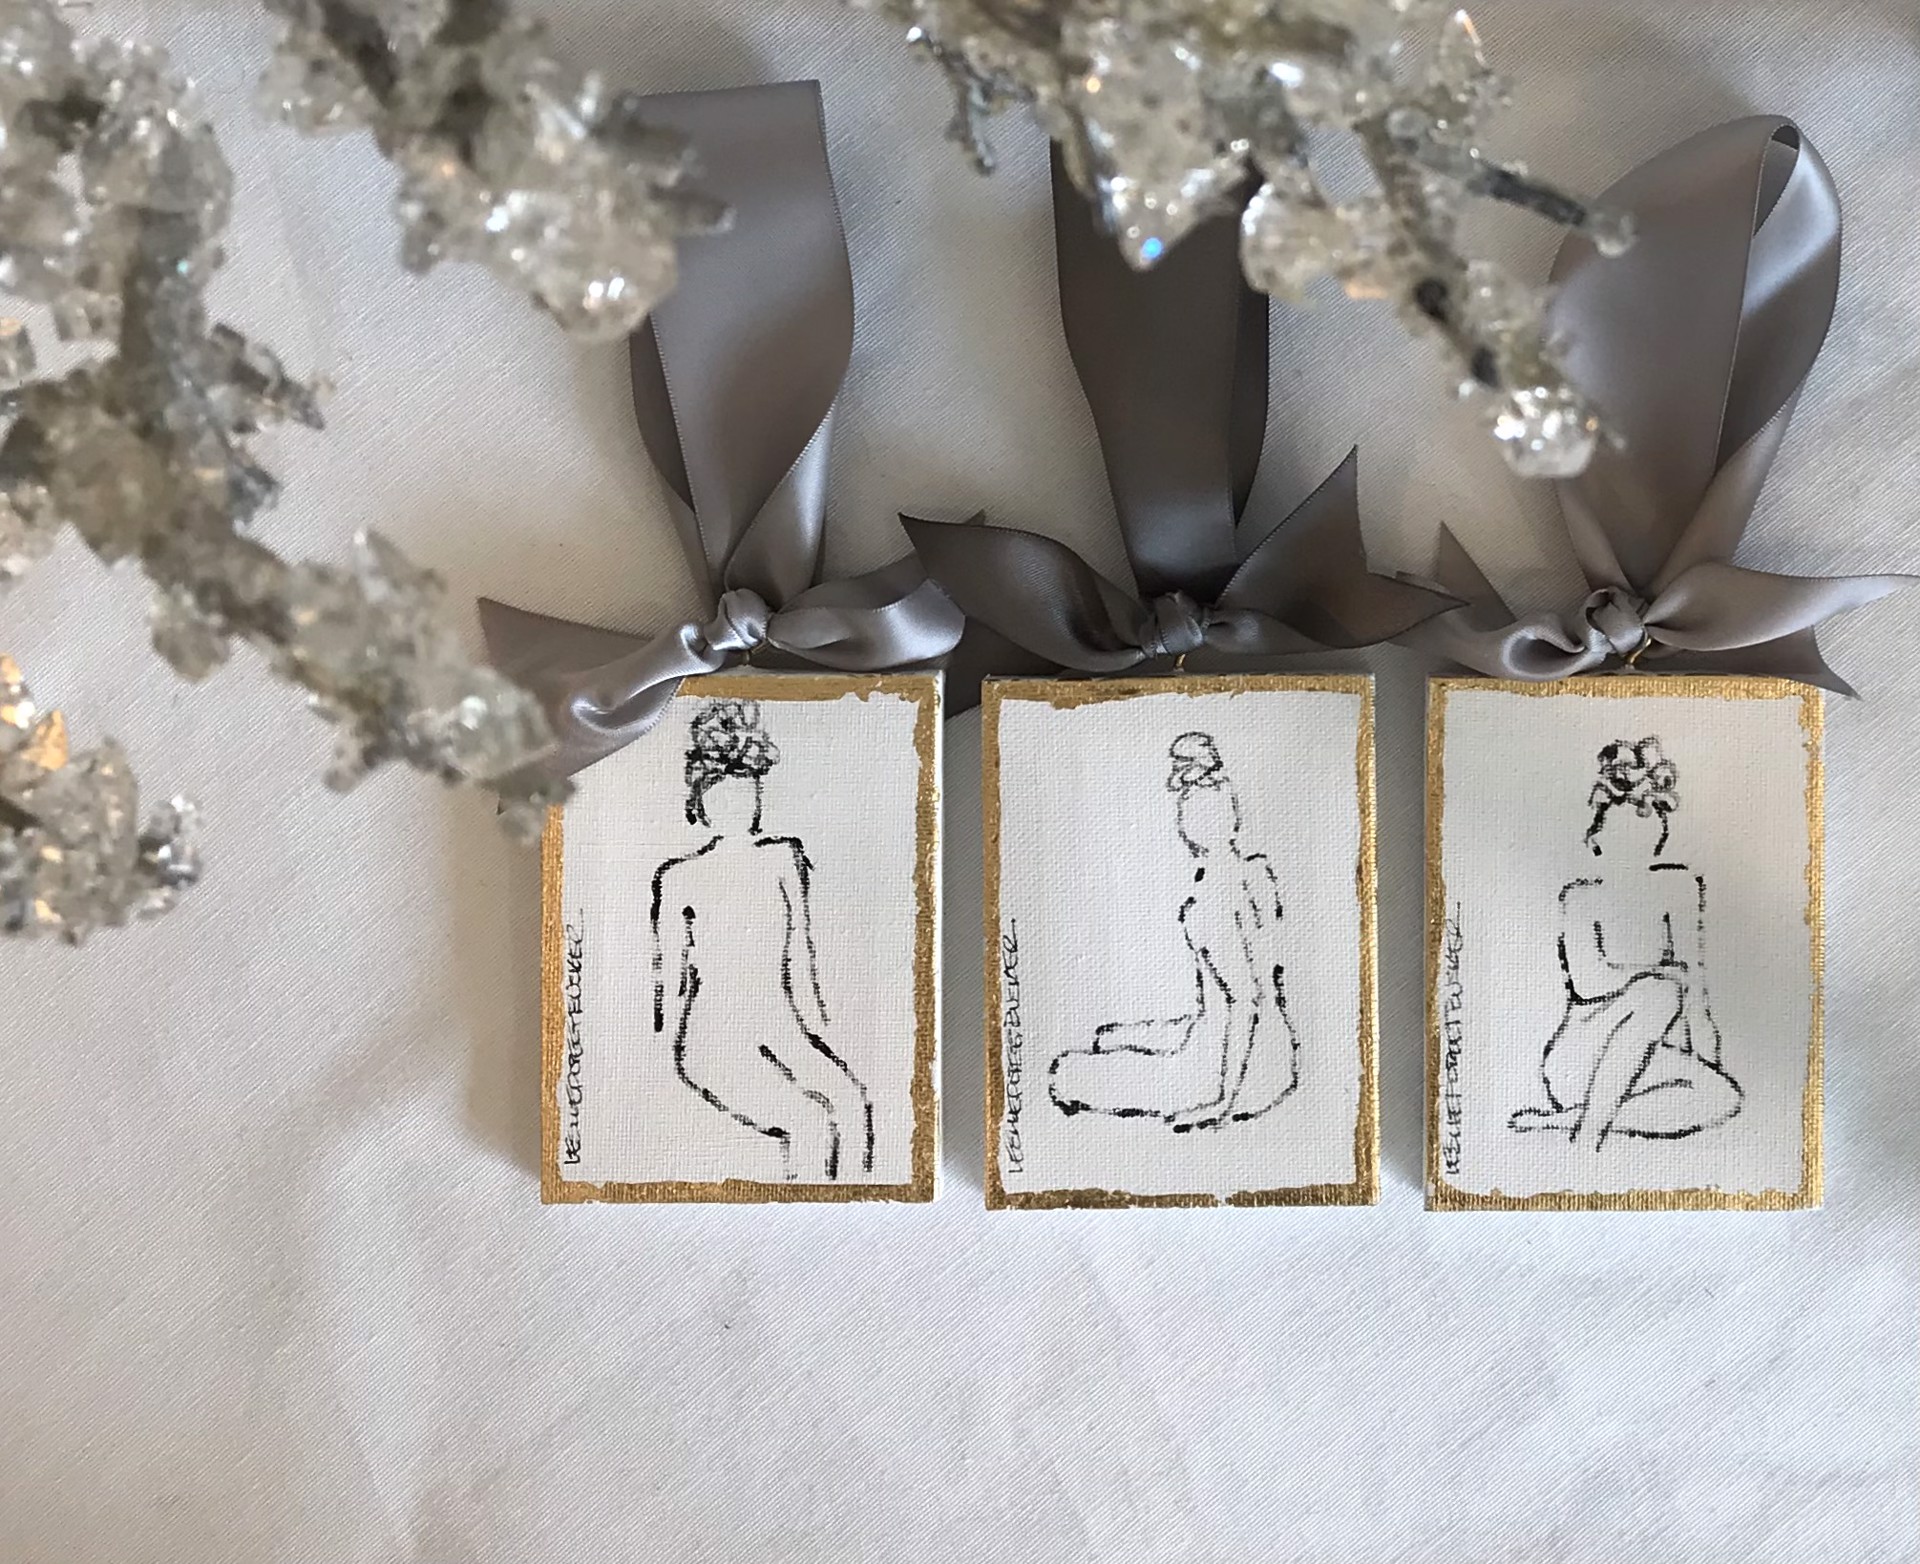 2021 Holiday Figure Ornaments, Set of Three, Group 3 by Leslie Poteet Busker